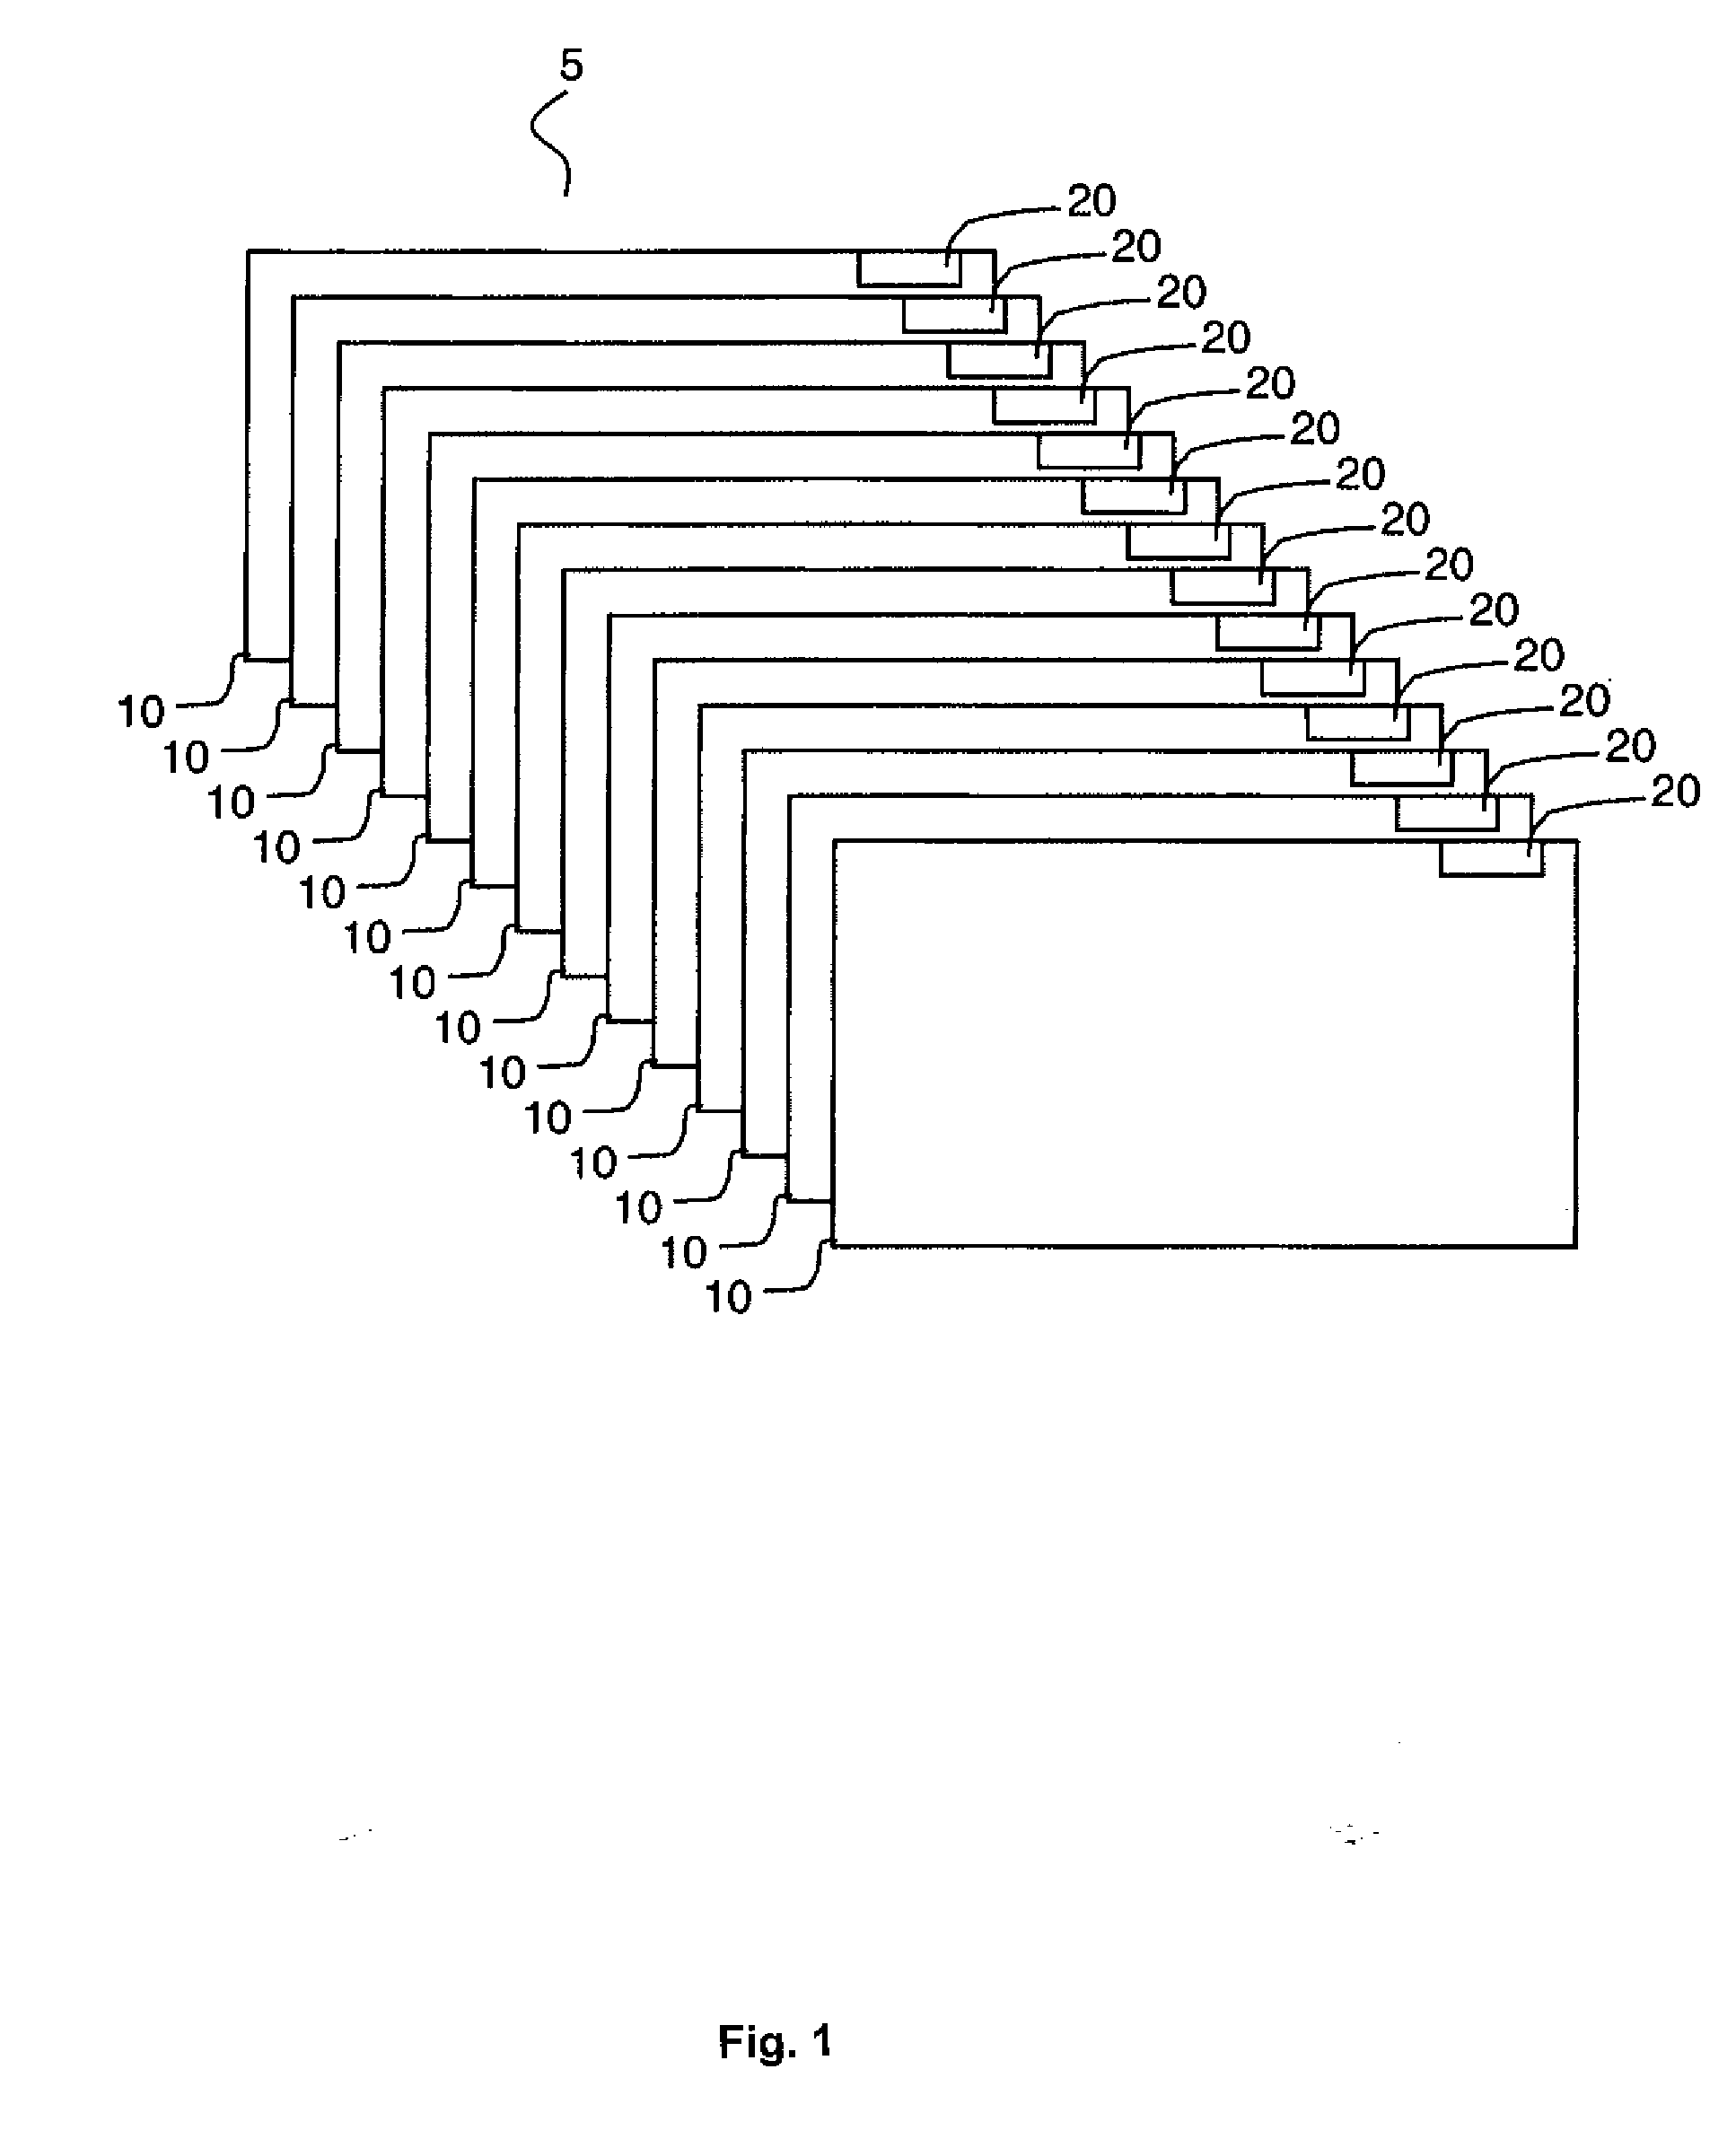 Method and apparatus for collection of personal income tax information